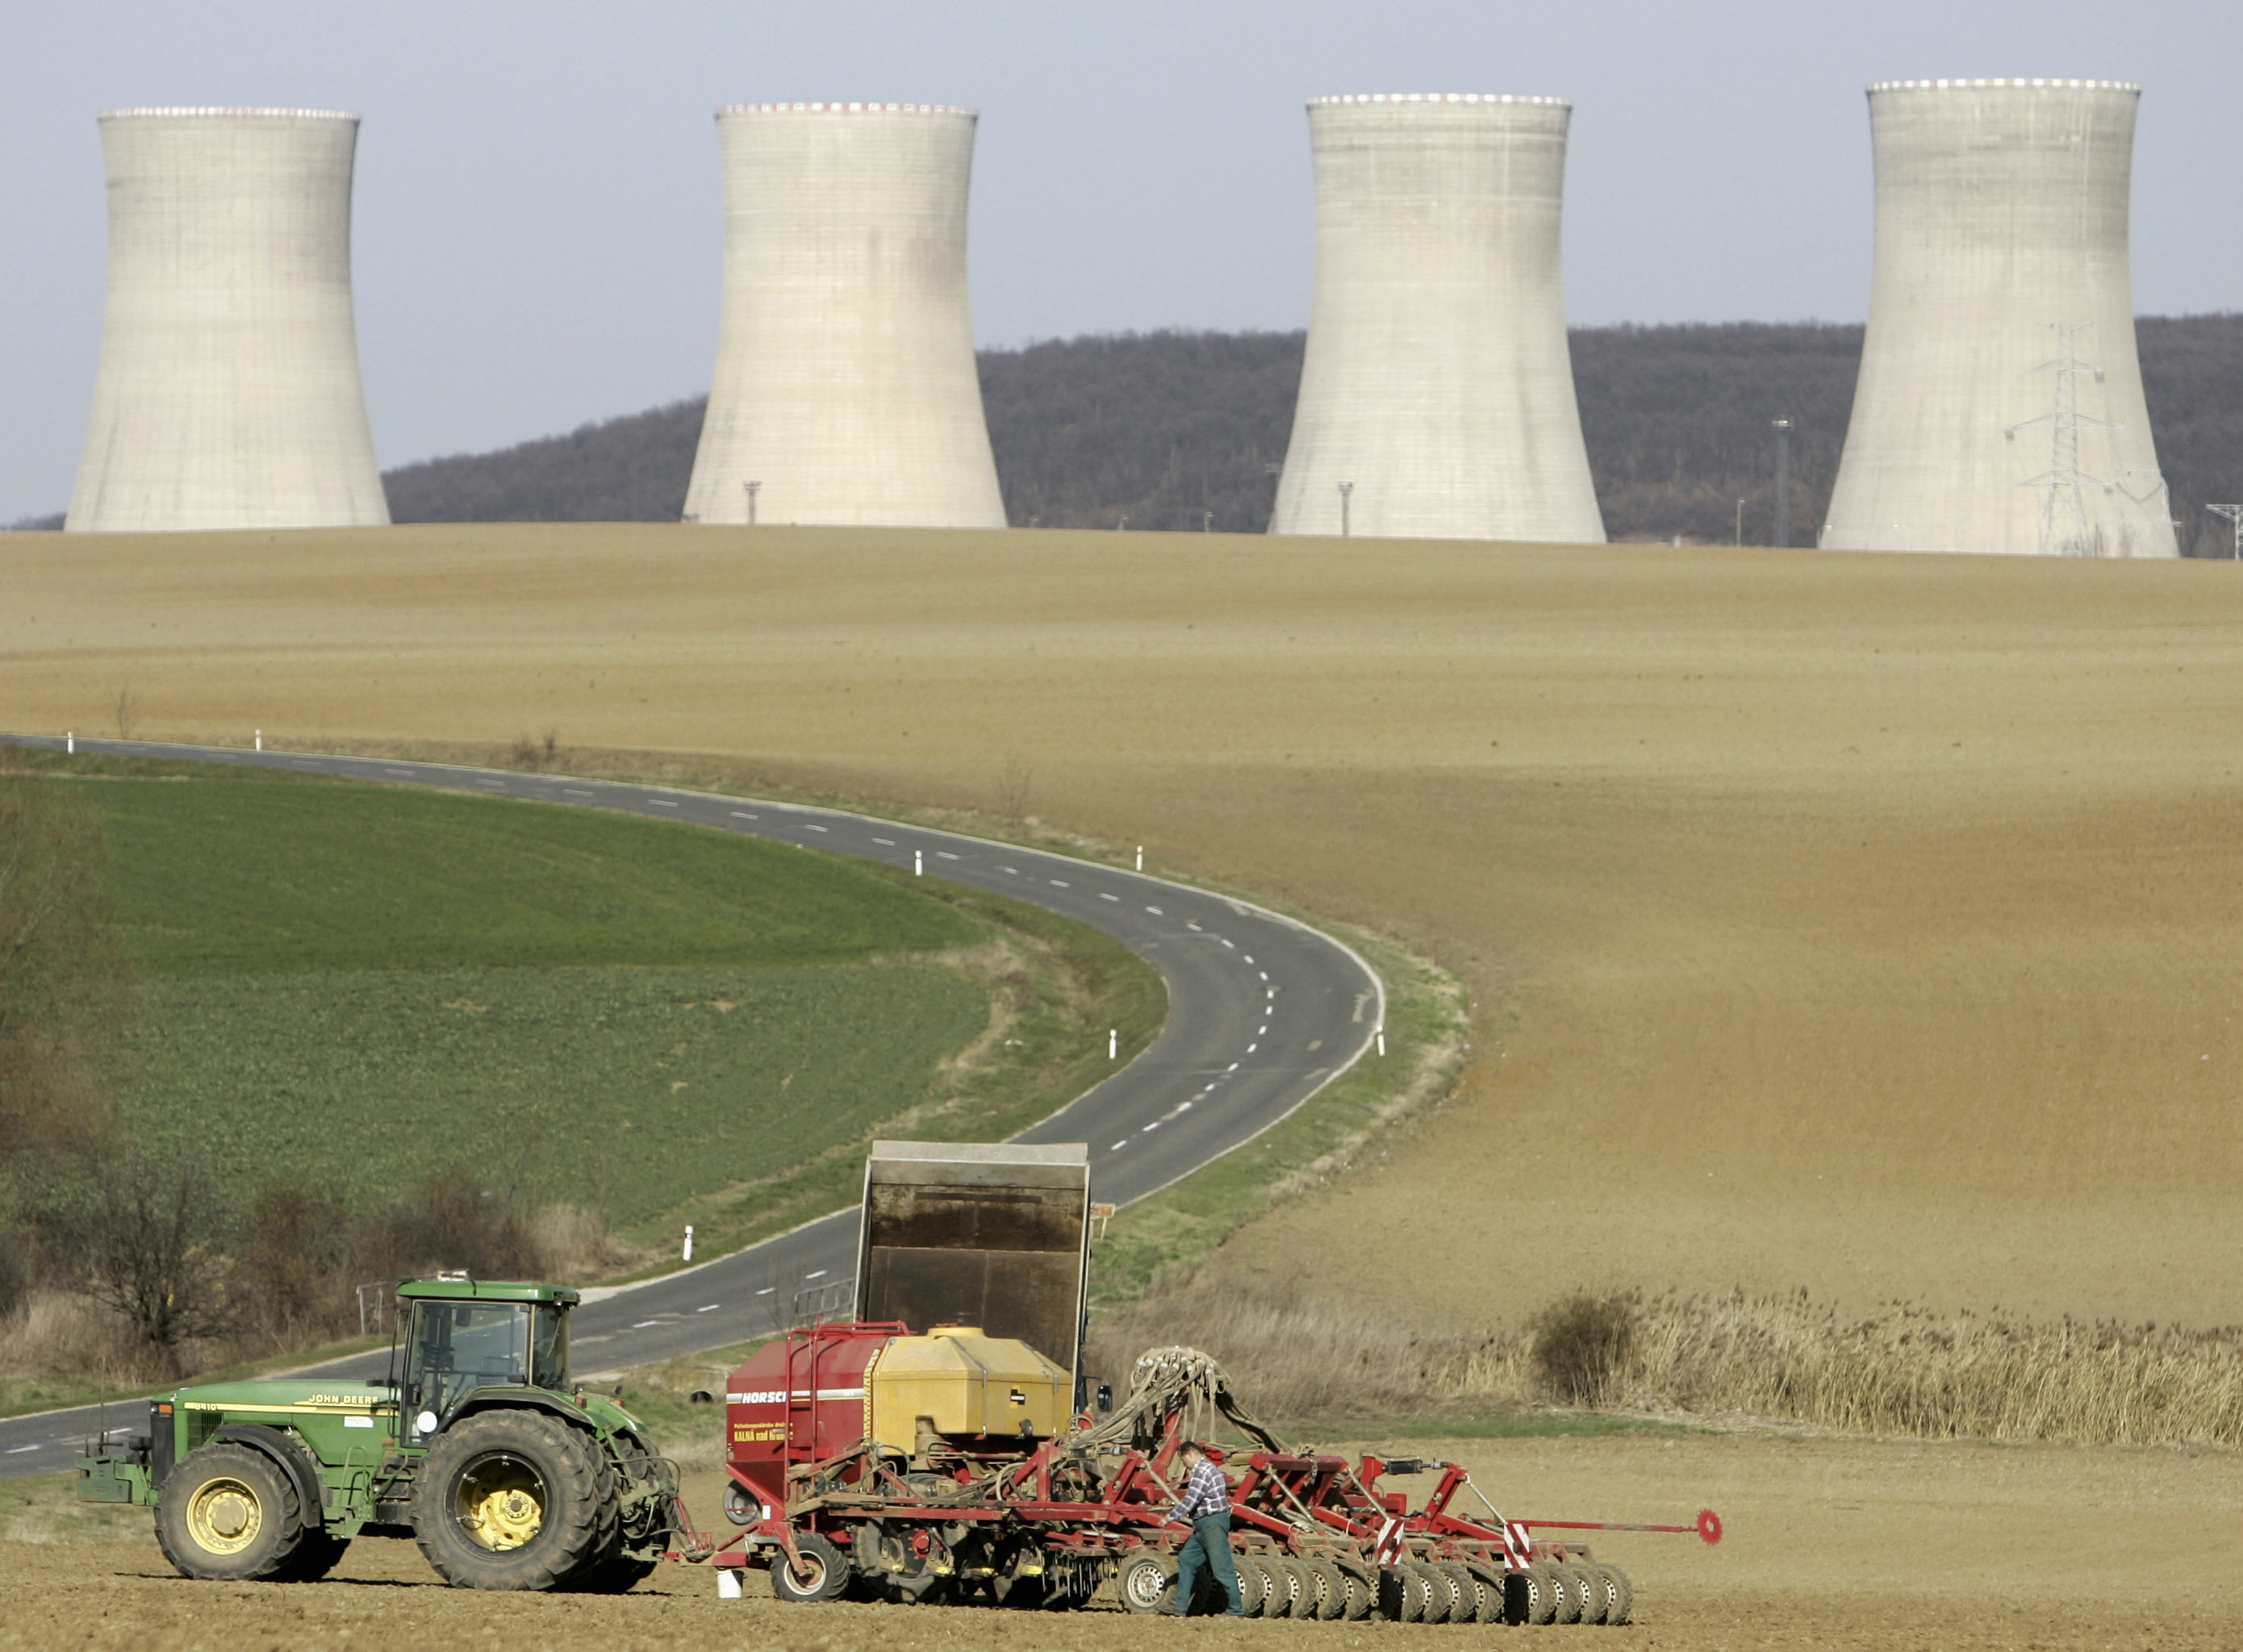 A farmer is seen in front of the Mochovce Nuclear Power Plant cooling towers in Mochovce